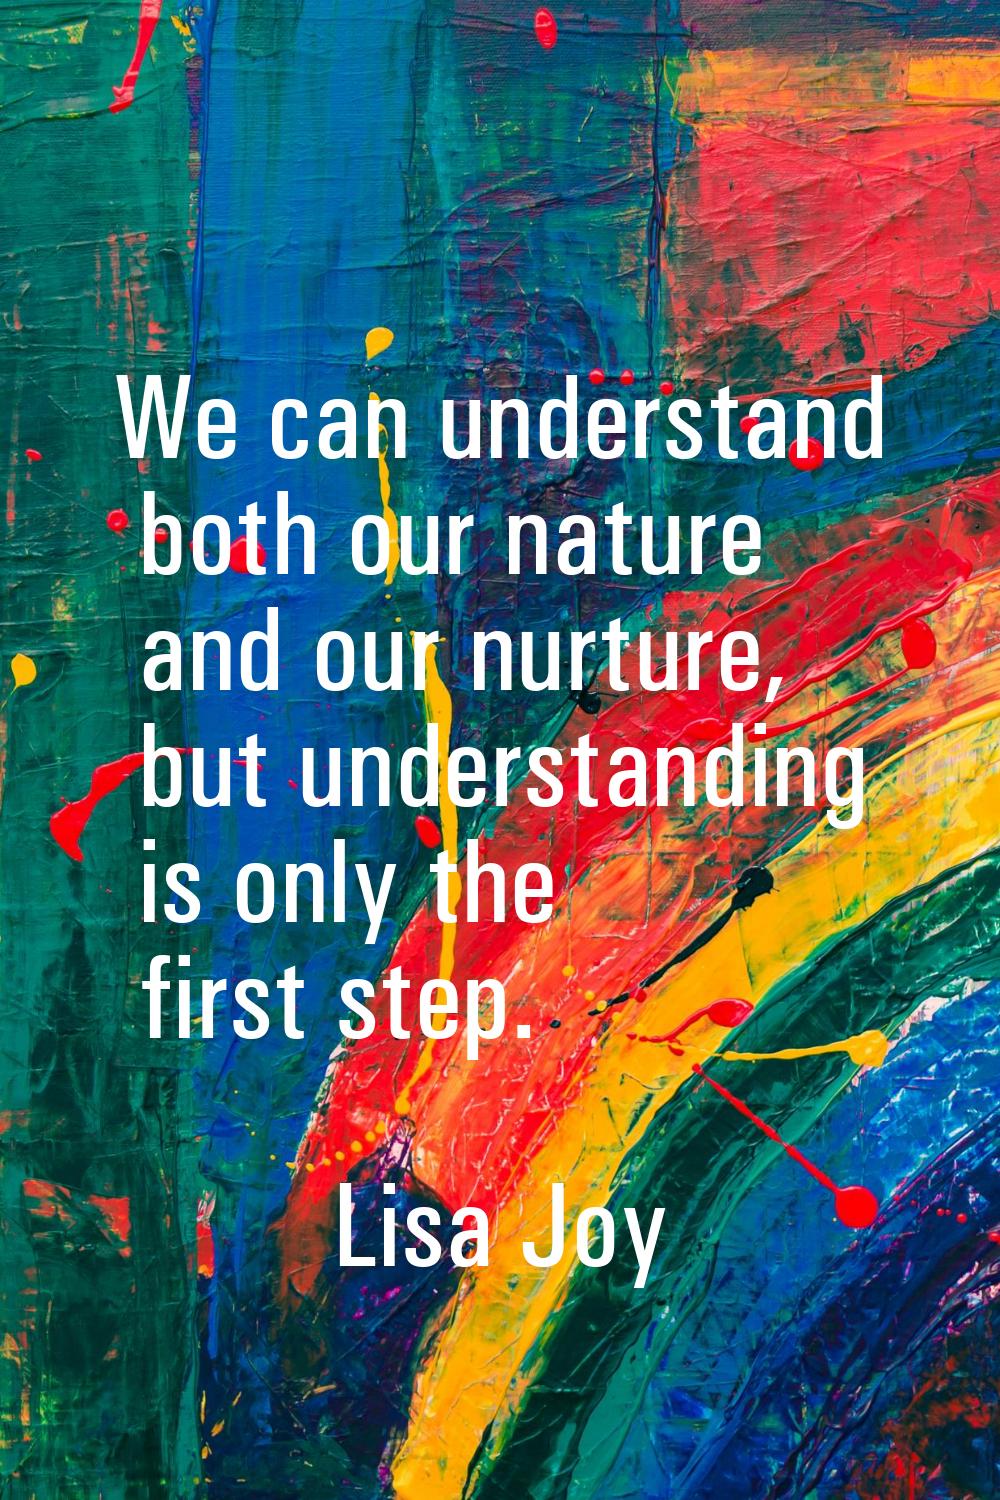 We can understand both our nature and our nurture, but understanding is only the first step.